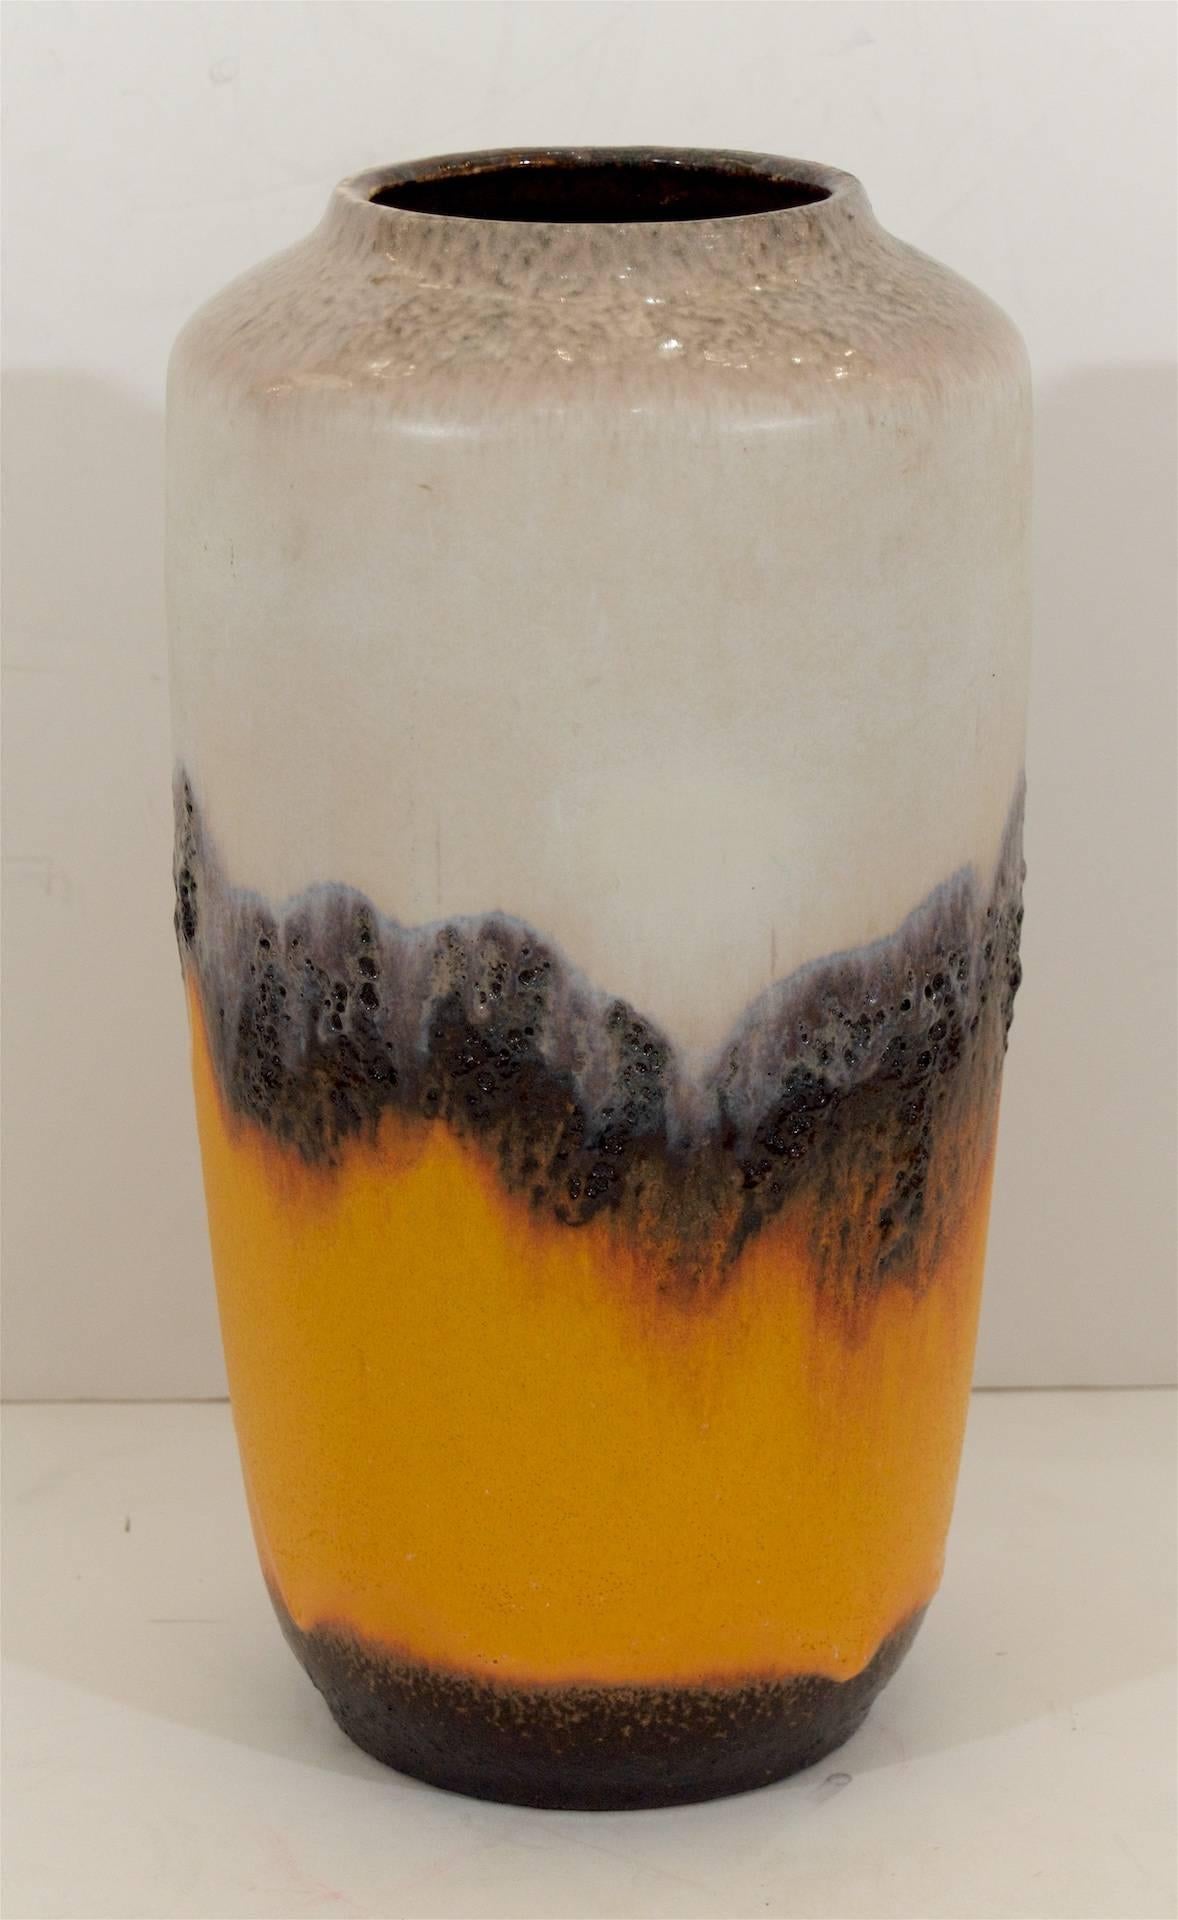 Highly dramatic Scheurich Keramik vase with an unusual gradient of glazes the lower half a fiery orange banded by matte textural lava glaze, the upper half in cooling opalescent tones.